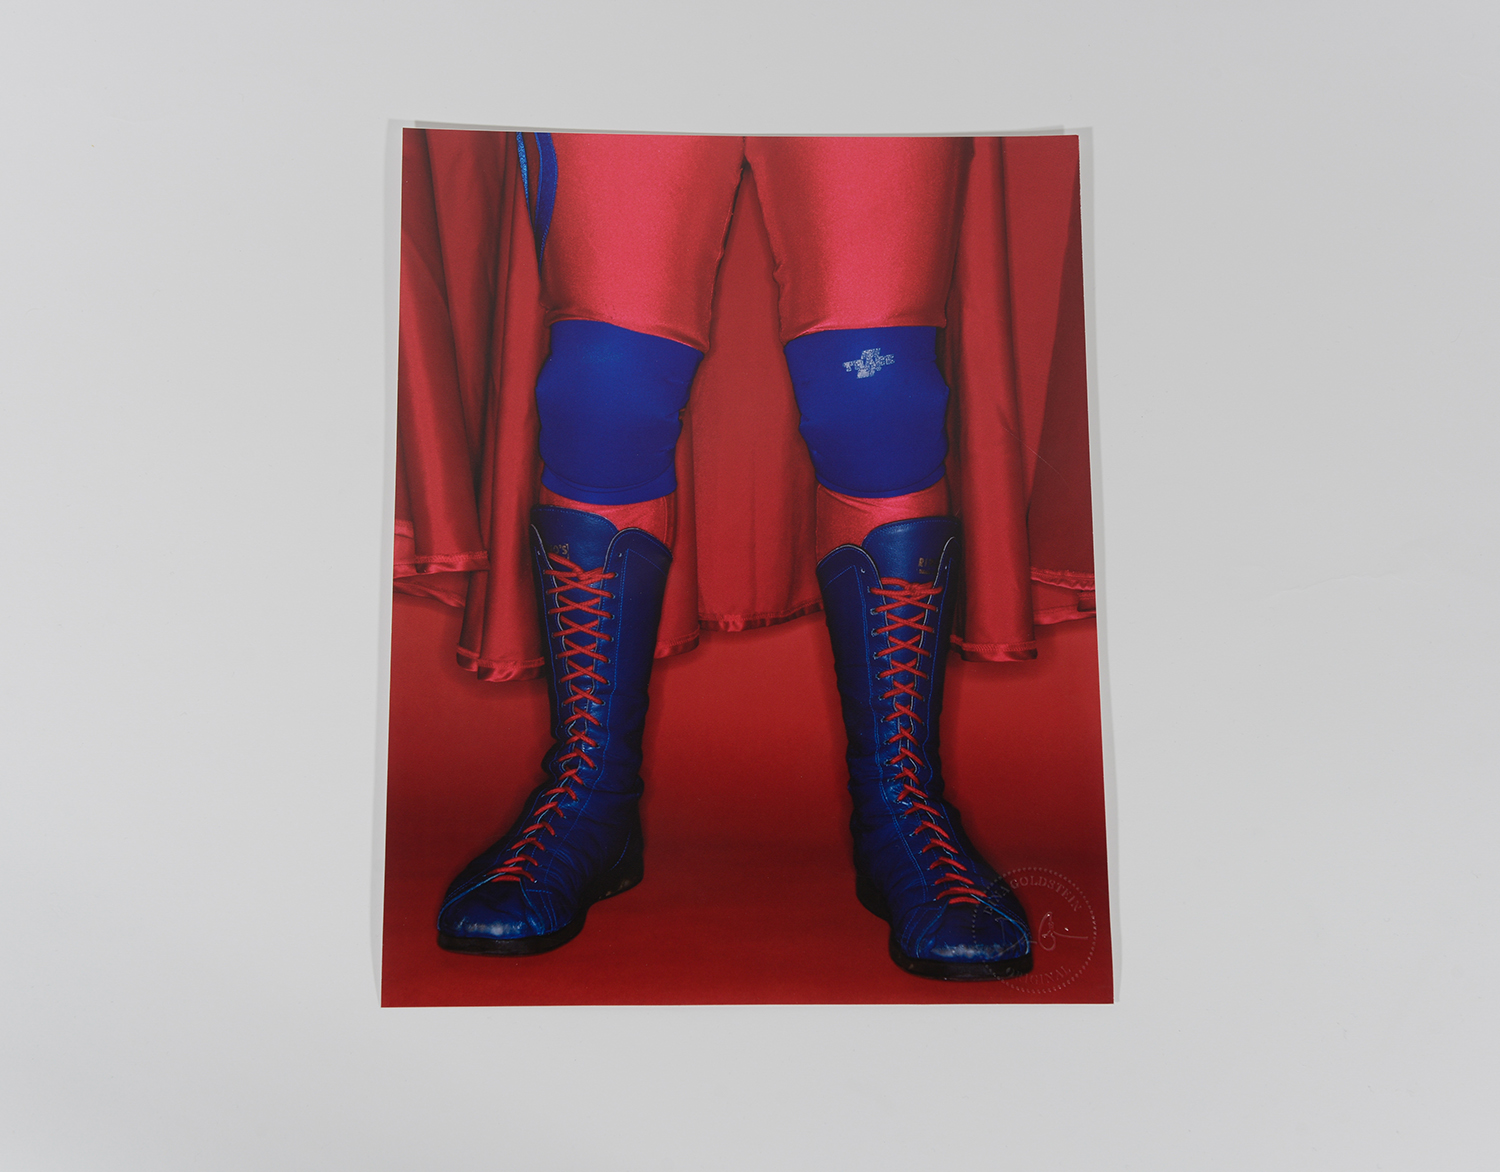 Blue Boots_Wrestlers_2004_36